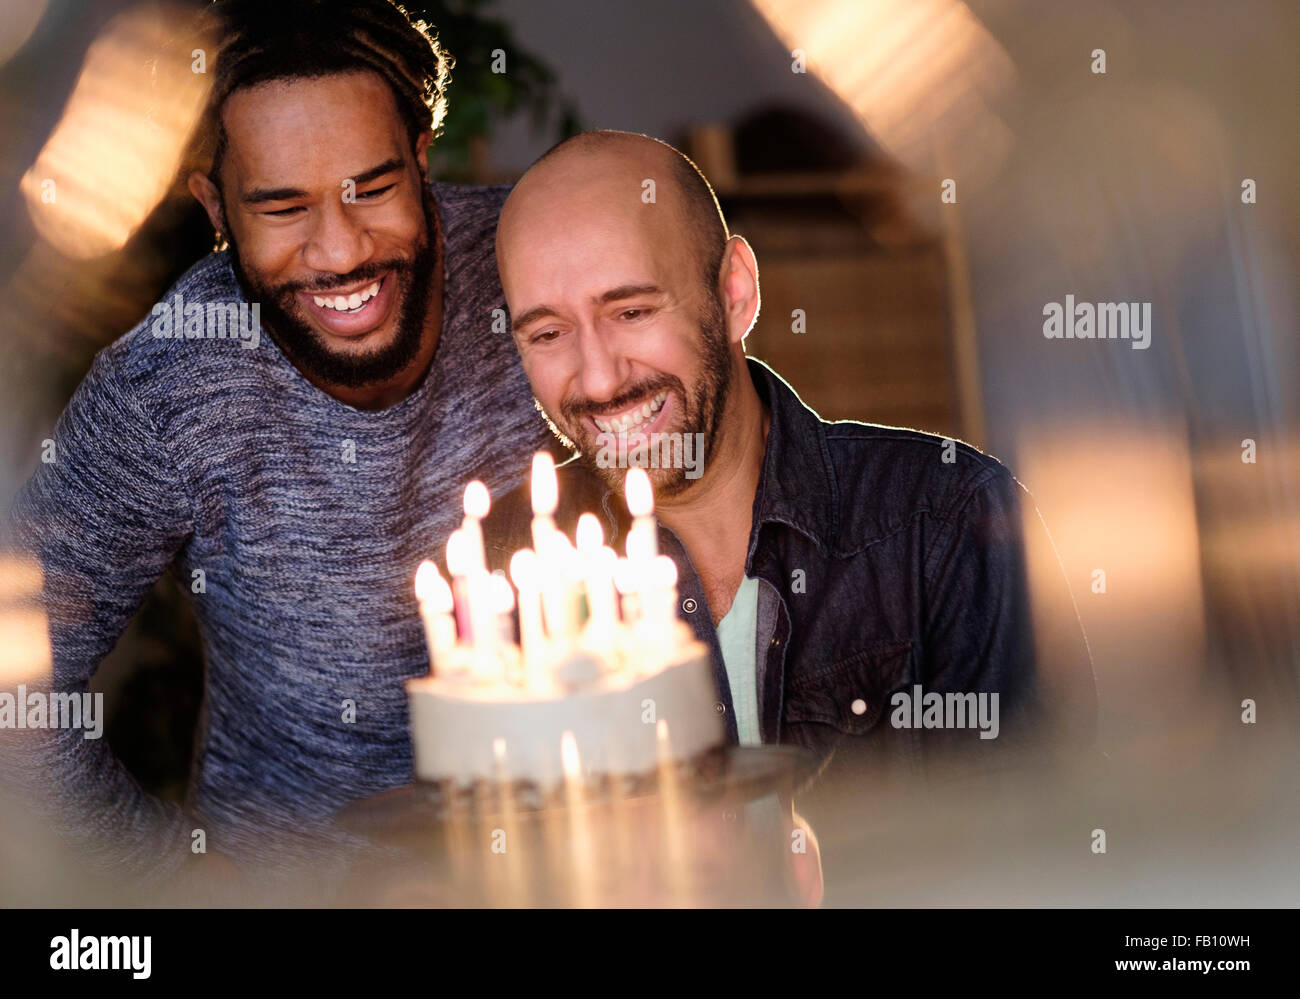 Smiley homosexual couple looking at birthday cake Stock Photo